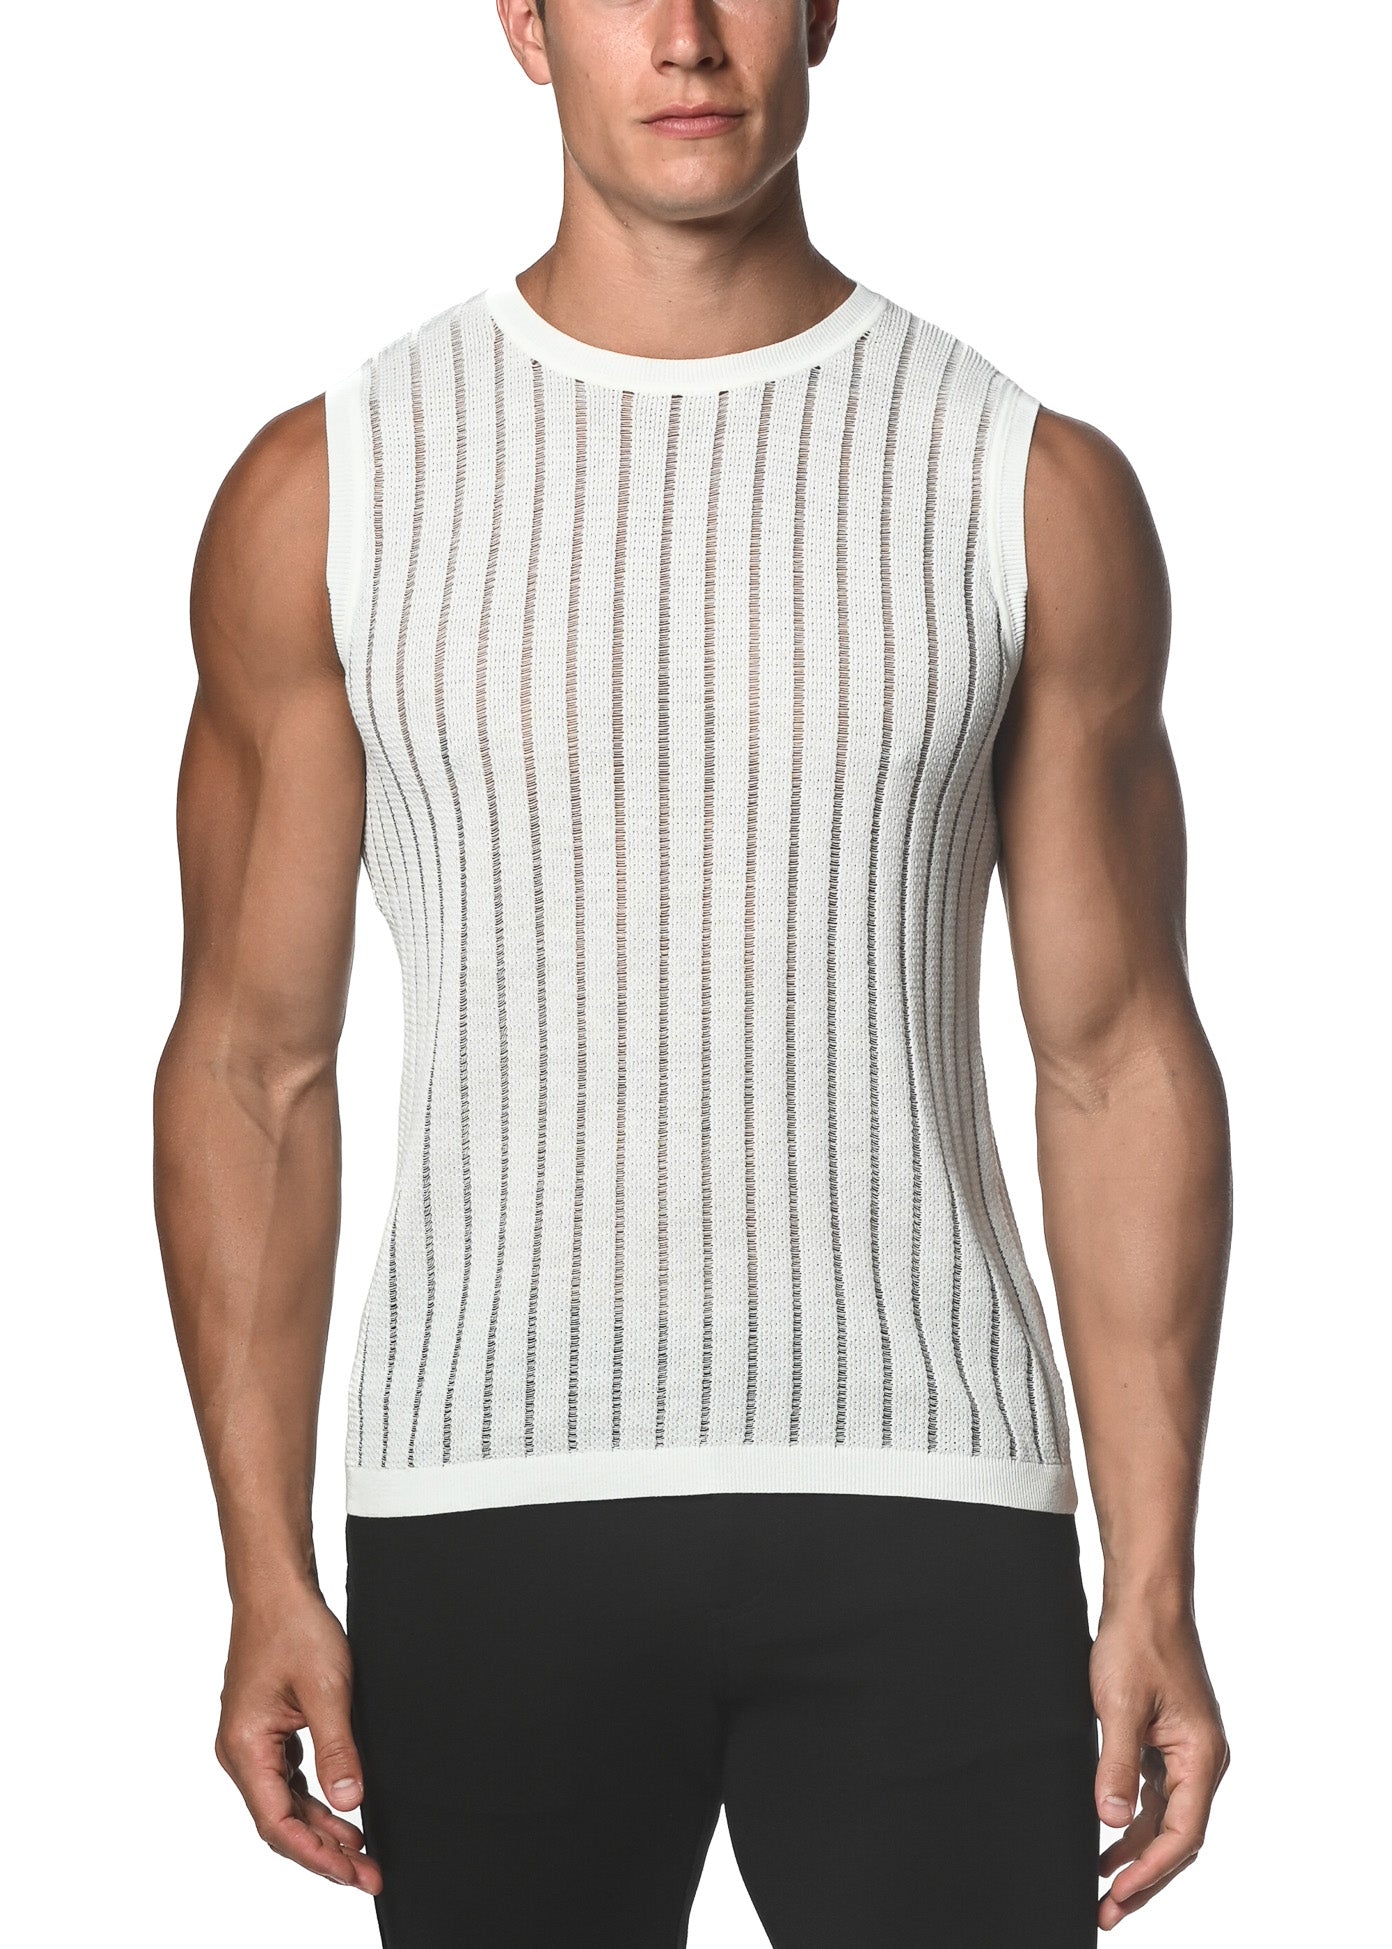 St33le Textured Knitted Vest